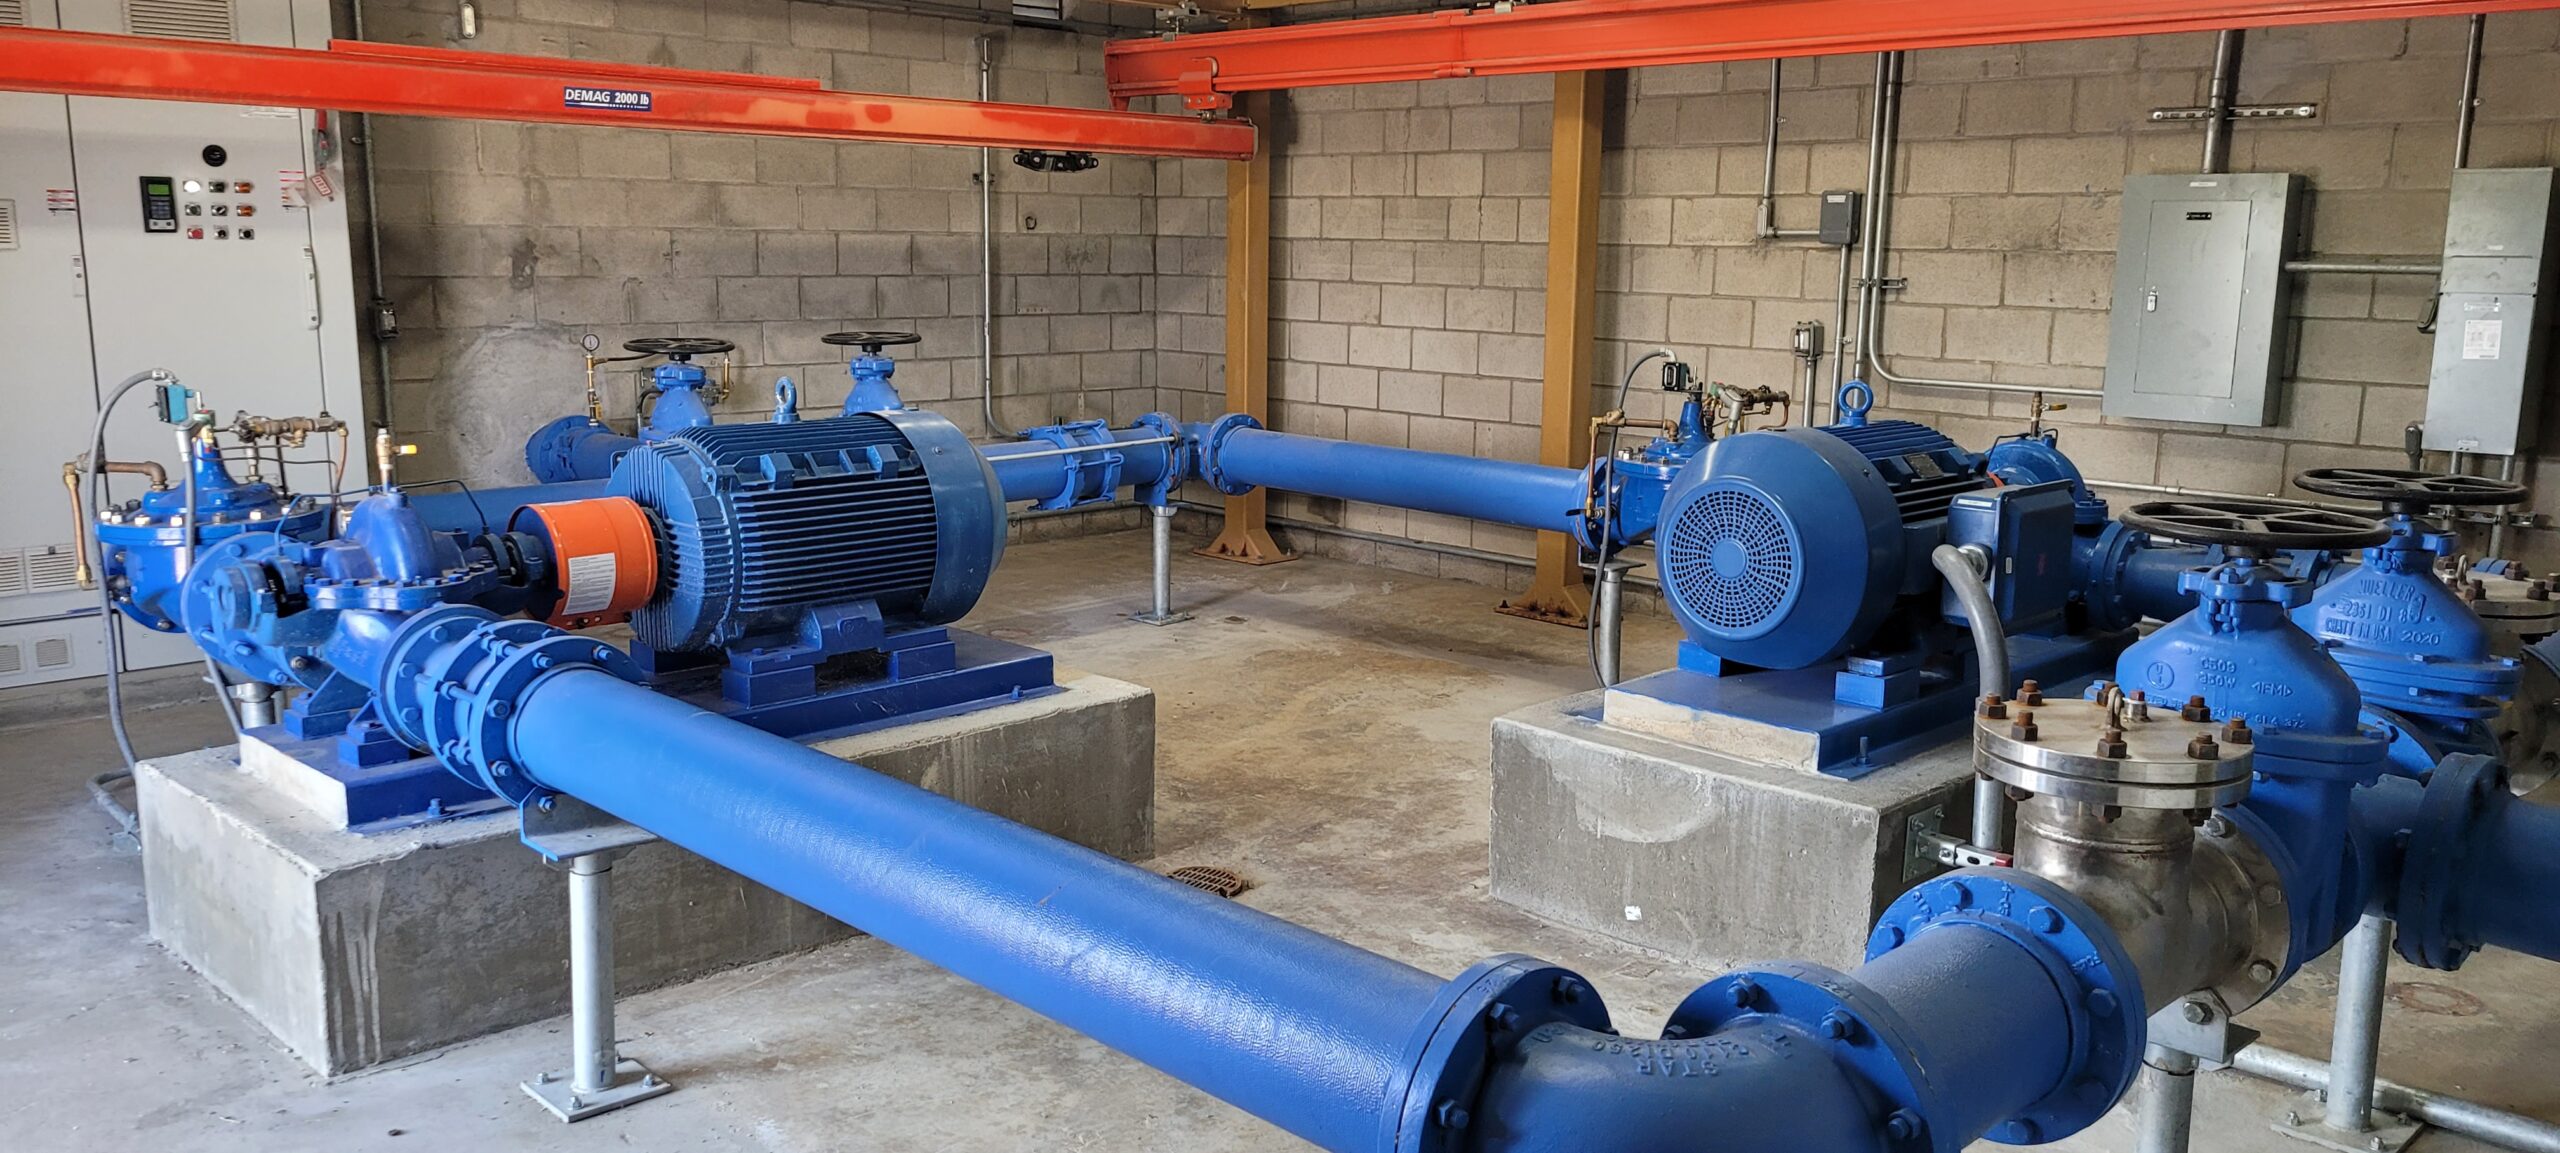 Industrial water pumping station at Camp Pendleton with large blue pipes and electric motors mounted on concrete bases in a utility room.